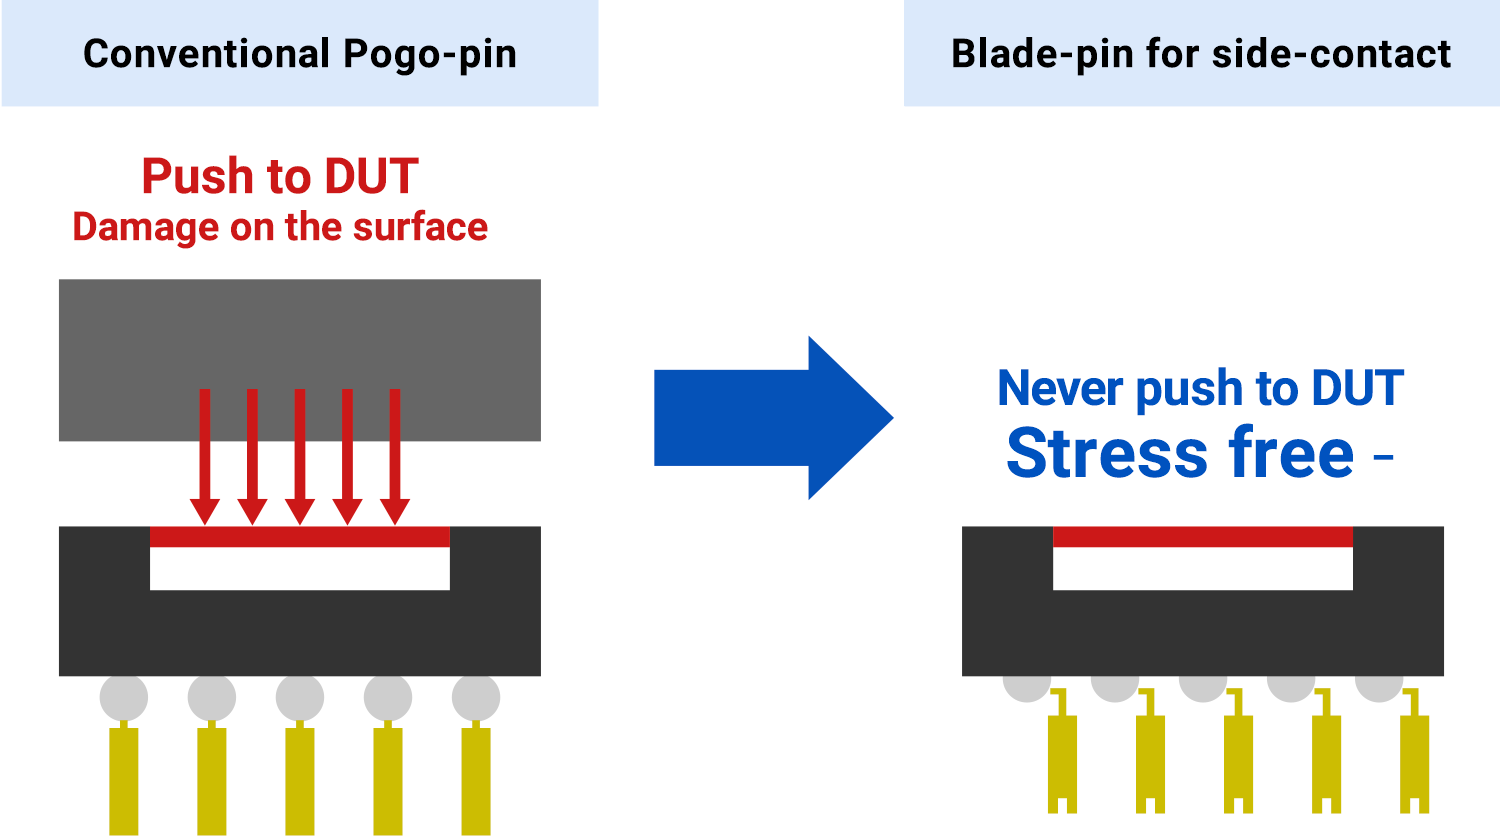 Conventional Pogo-pin and Blade-pin for side-contact